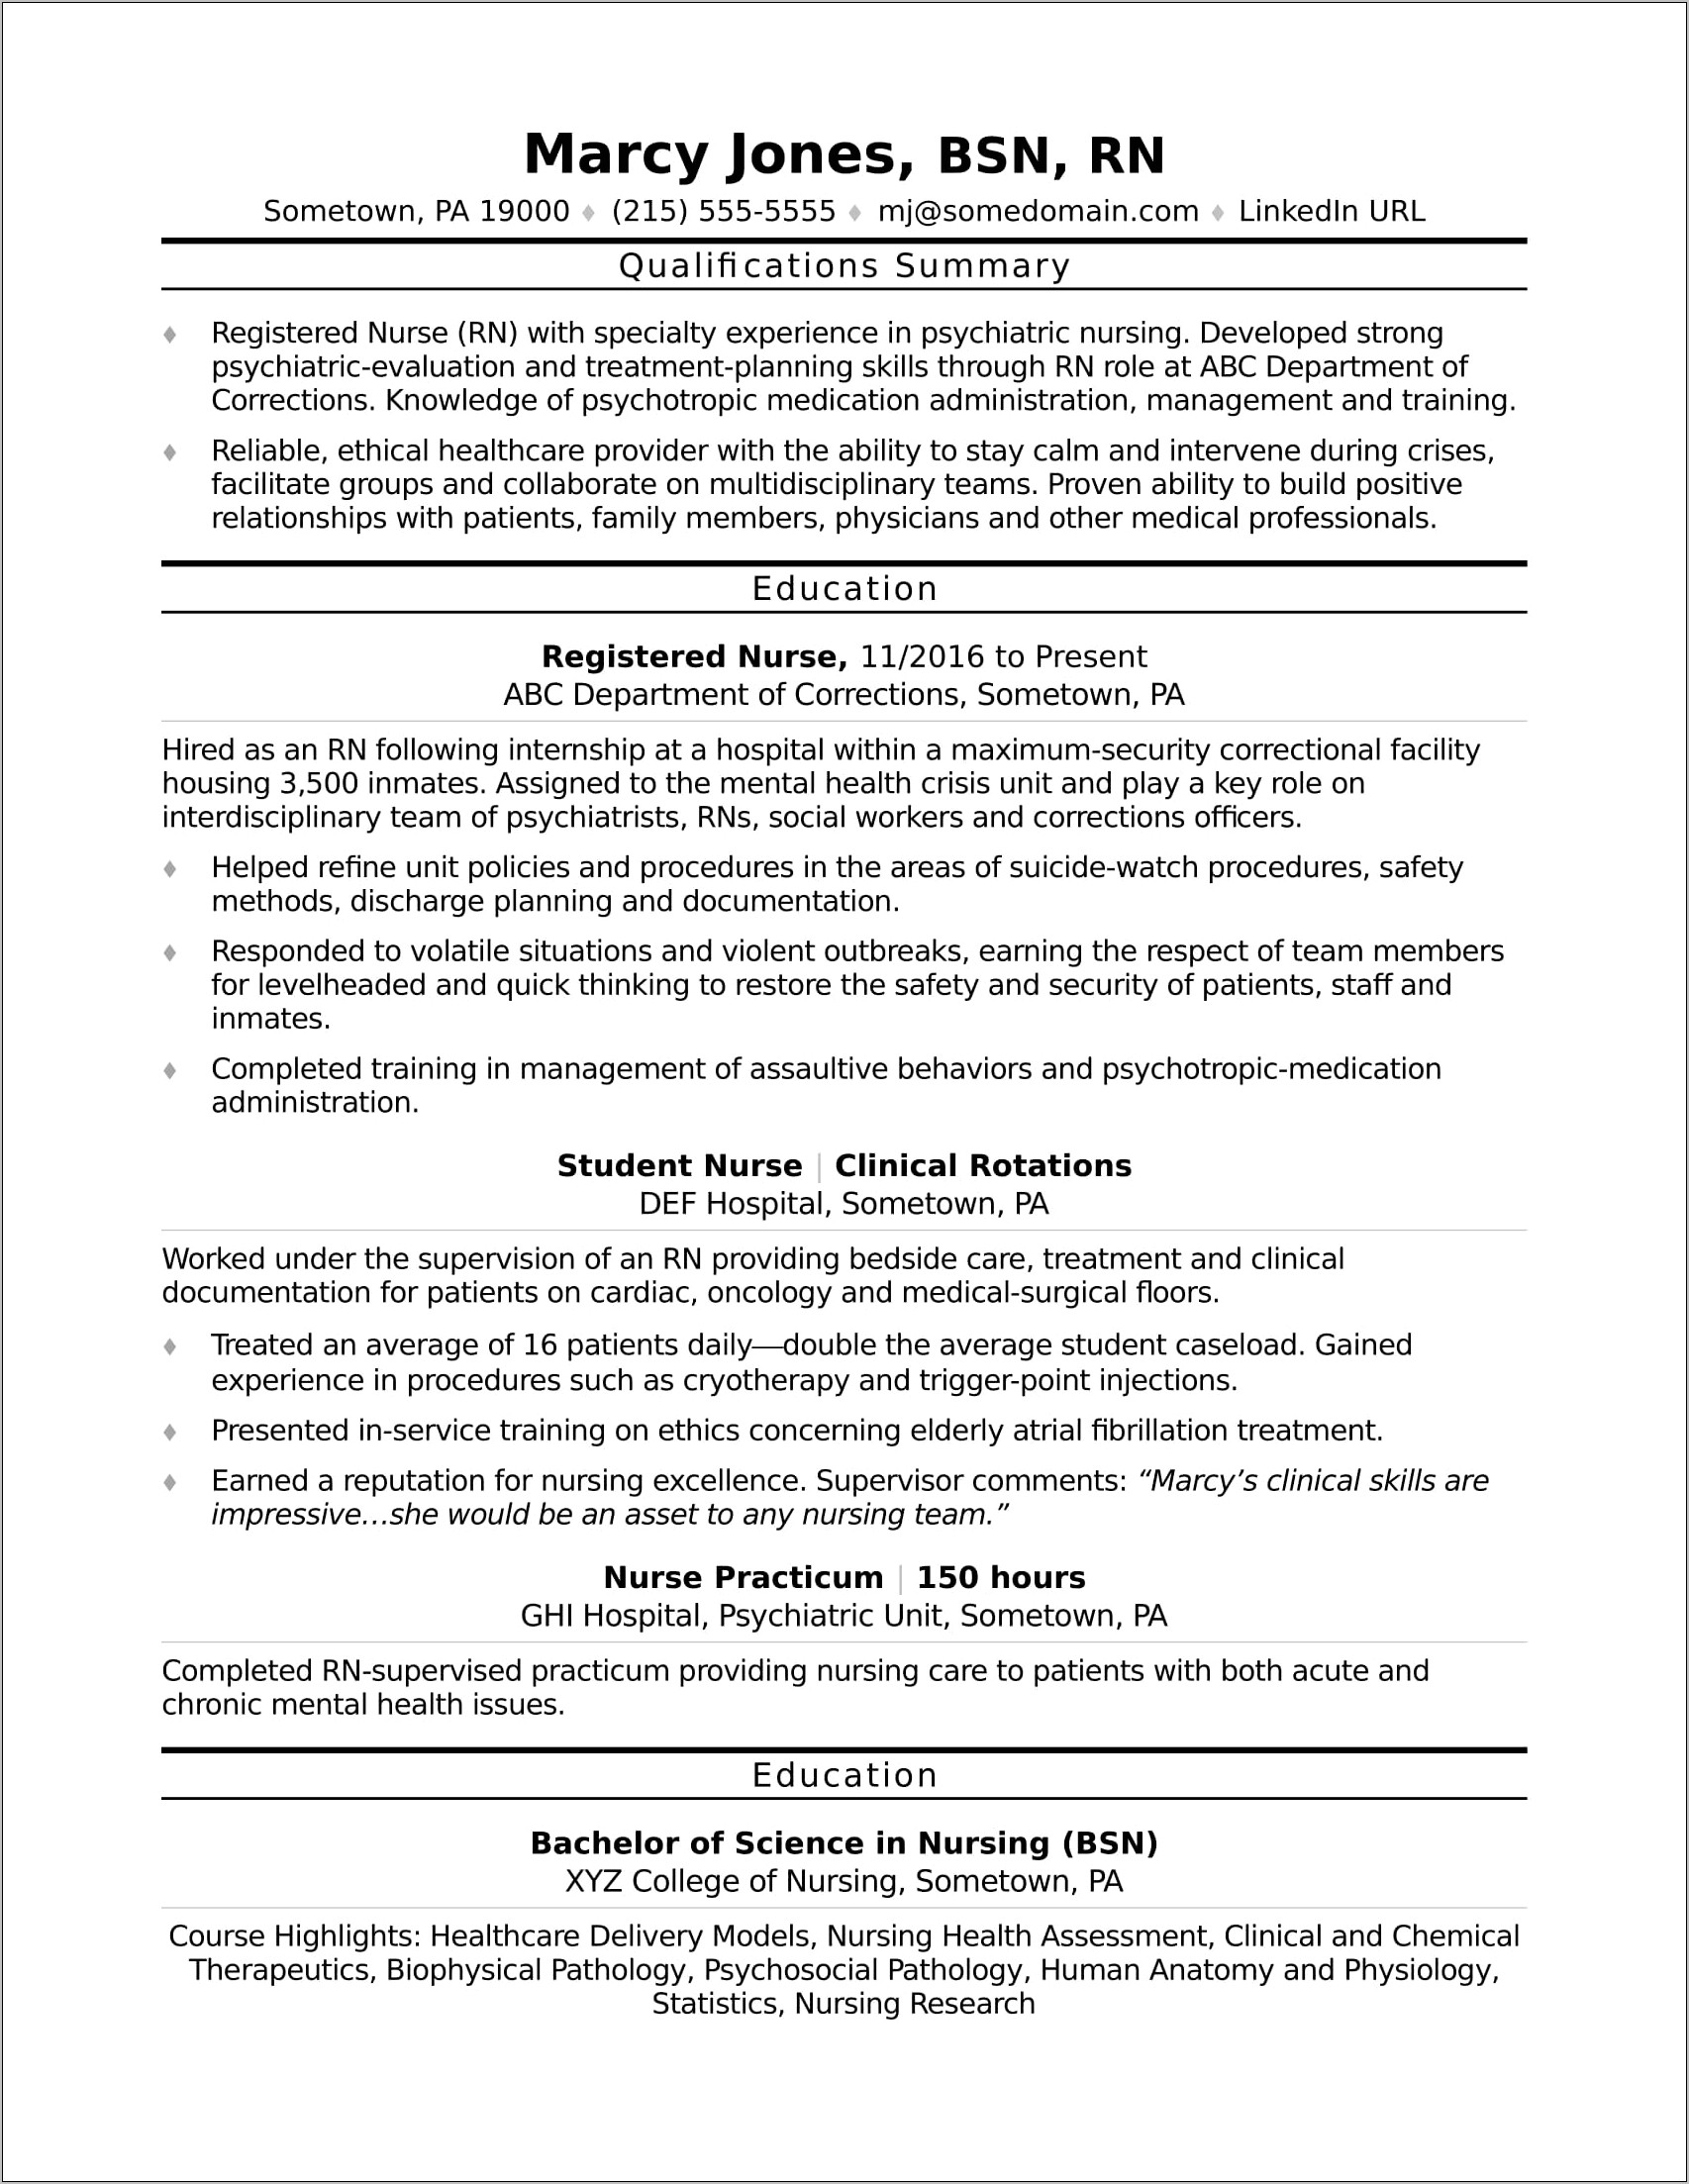 Resume Template For Recent College Graduate In Forensics